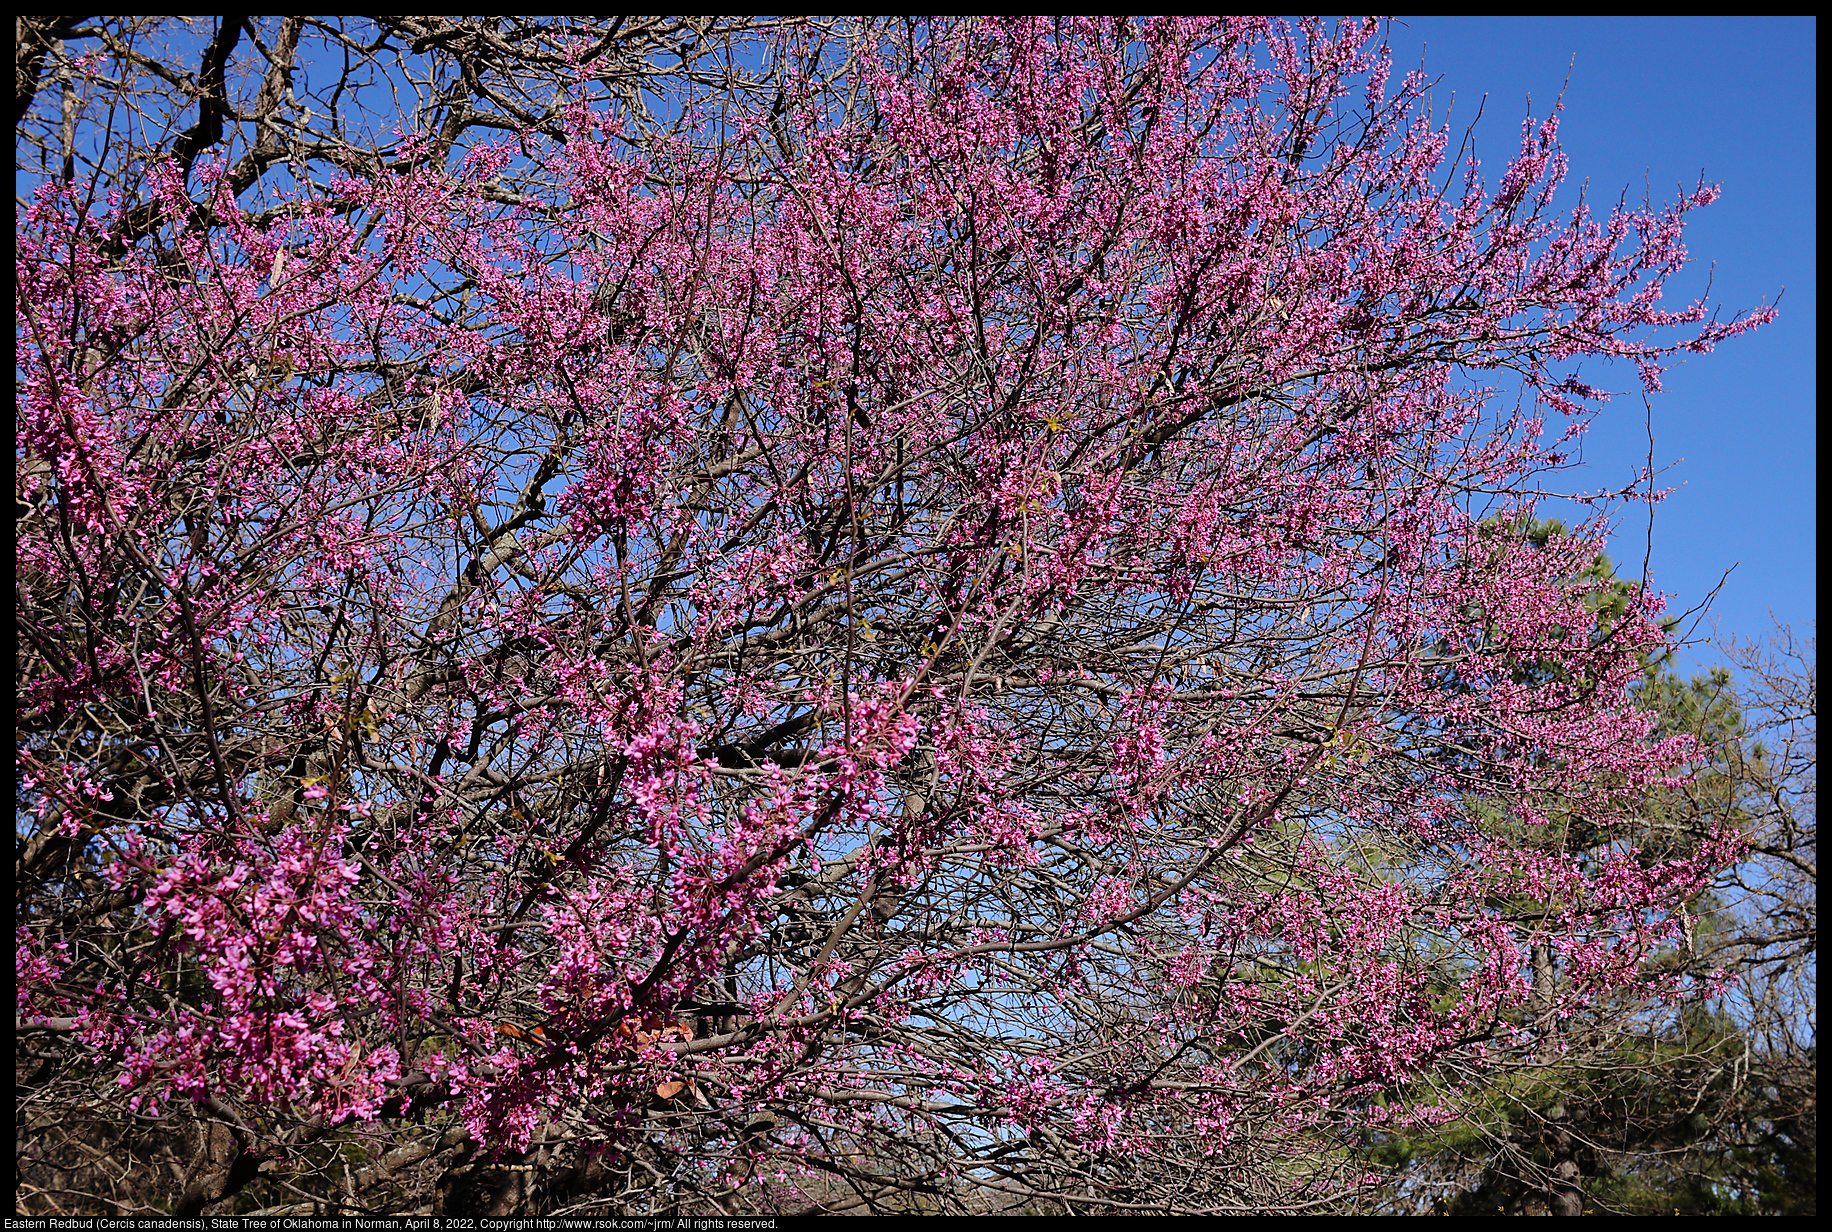 Eastern Redbud (Cercis canadensis), State Tree of Oklahoma in Norman, April 8, 2022